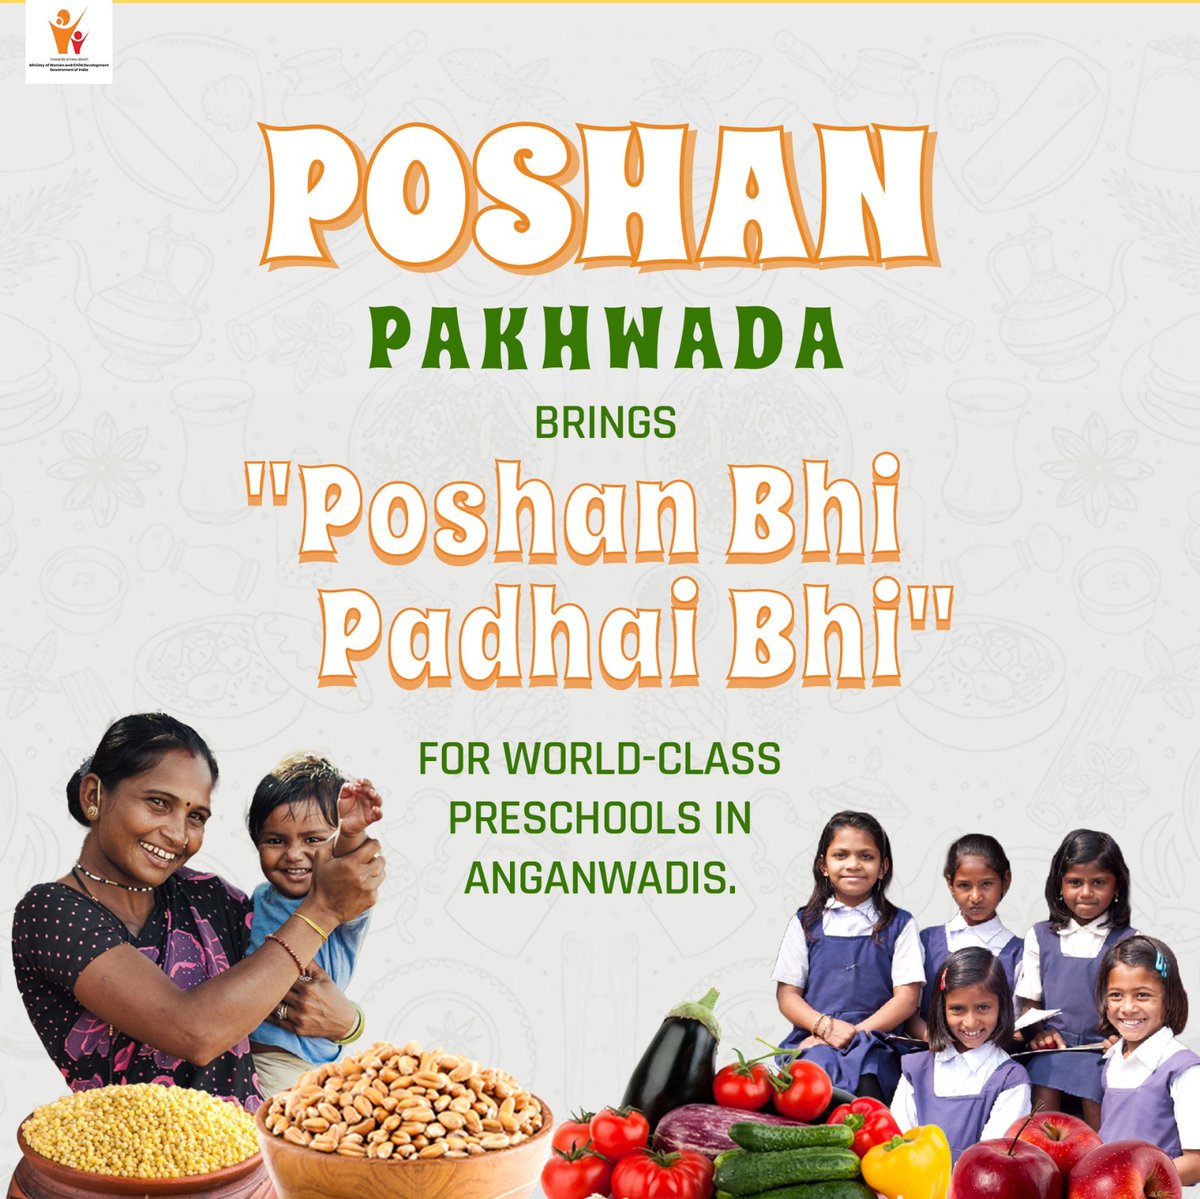 6th Poshan Pakhwada will focus on Poshan Bhi Padhai Bhi which is a path breaking Early Childhood Care & Education (ECCE) program to help India develop one of the world’s largest, universal, high-quality pre-school network at Anganwadi Centers. 
.
#पोषणकामहत्व
#poshanpakhwada2024